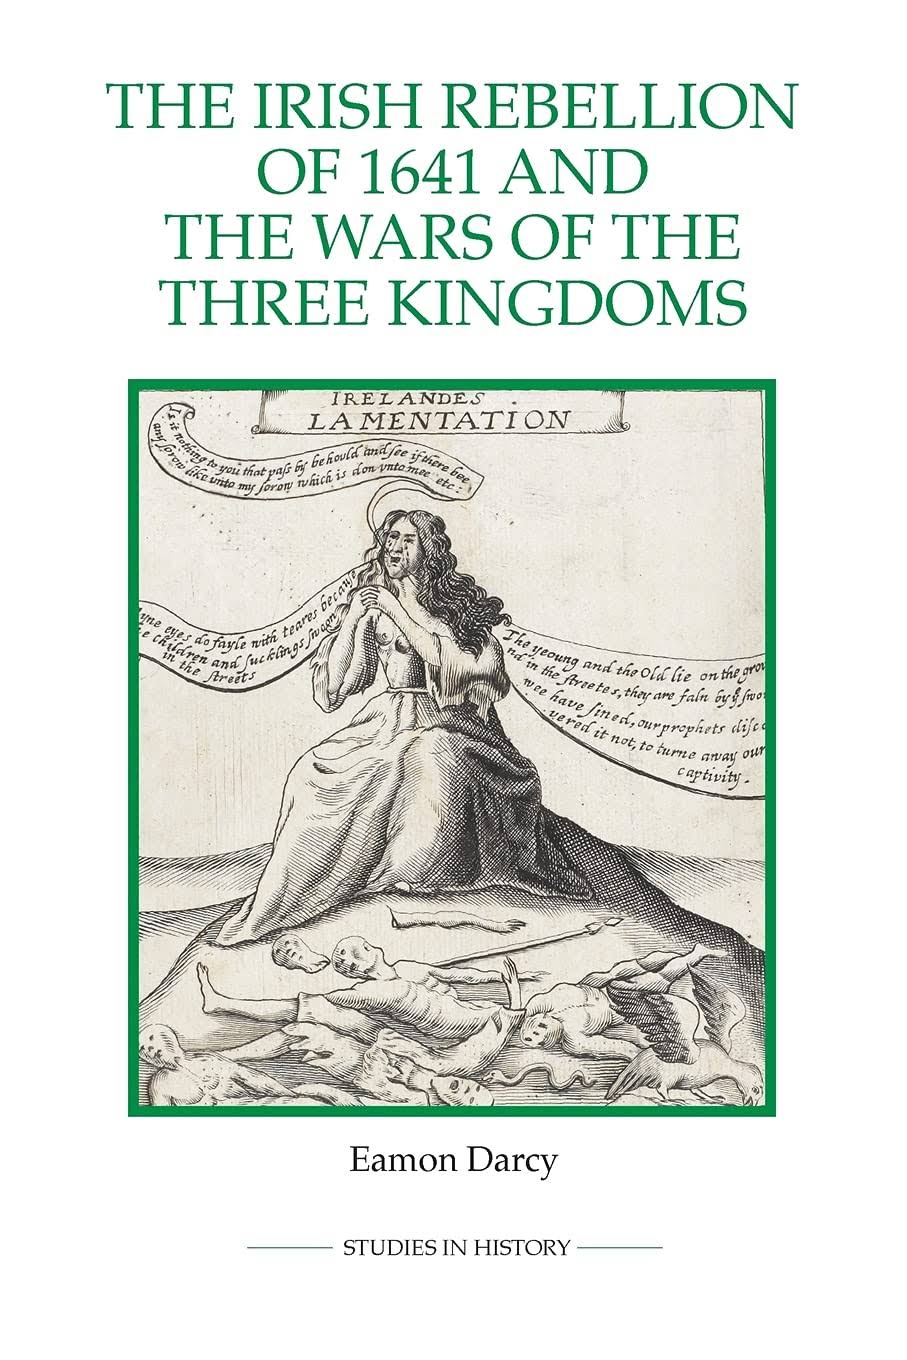 The Irish Rebellion of 1641 and the Wars of the Three Kingdoms [Book]